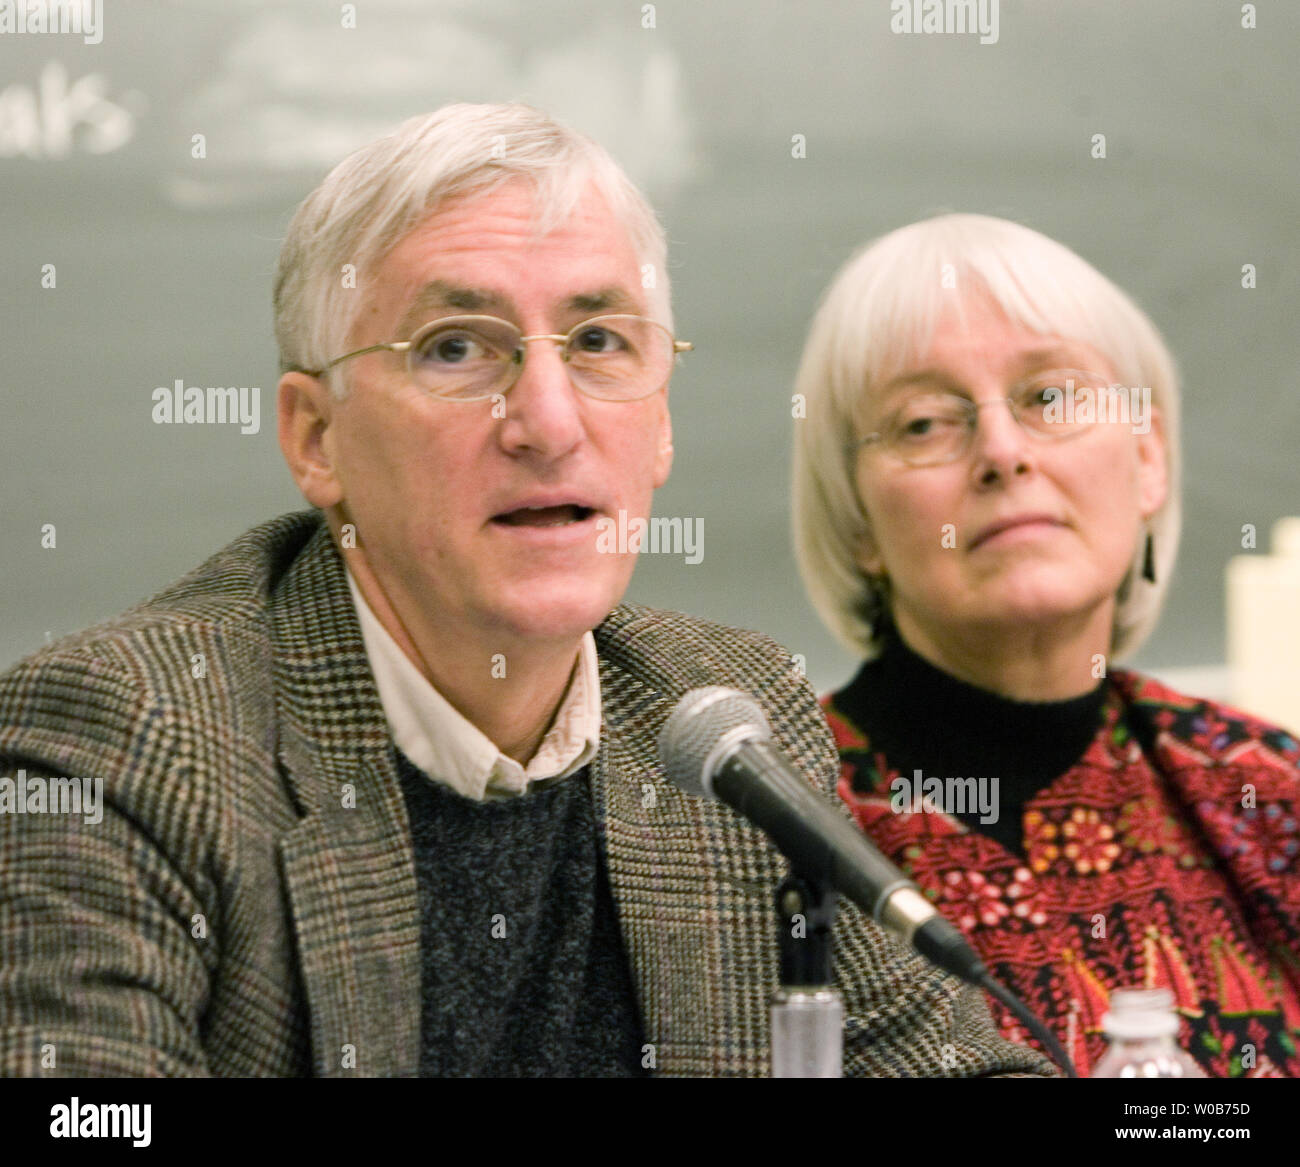 Rachel Corrie's parents Craig (L) and Cindy from Olympia, Washington are guests at Simon Fraser University Harbor Centre in Vancouver British Columbia, February 3, 2008, where they discuss the play 'My Name Is Rachel Corrie' about their daughter who was crushed to death by an Israeli Defense Forces bulldozer in the Gaza strip March 2003 while volunteering with the International Solidarity Movement. The 70-minute one woman show compiled and edited by actor Alan Rickman and Gaurdian journalist Katharine Viner successfully premiered at the Royal Court in London and is being performed in Montreal Stock Photo